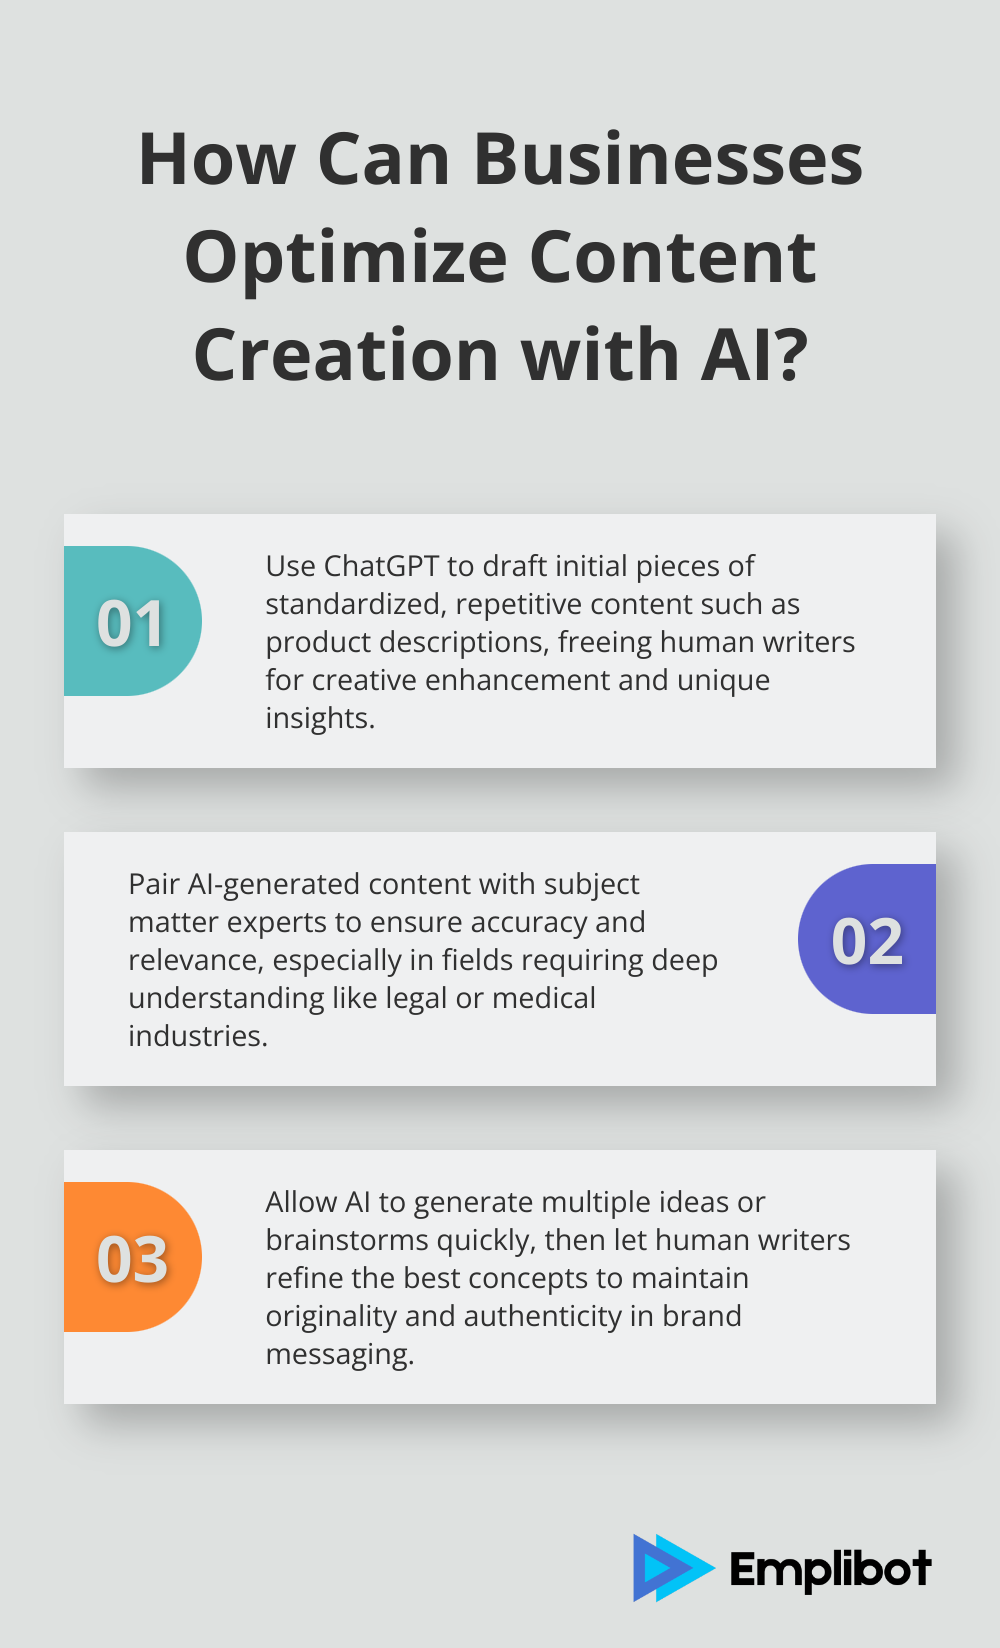 Fact - How Can Businesses Optimize Content Creation with AI?